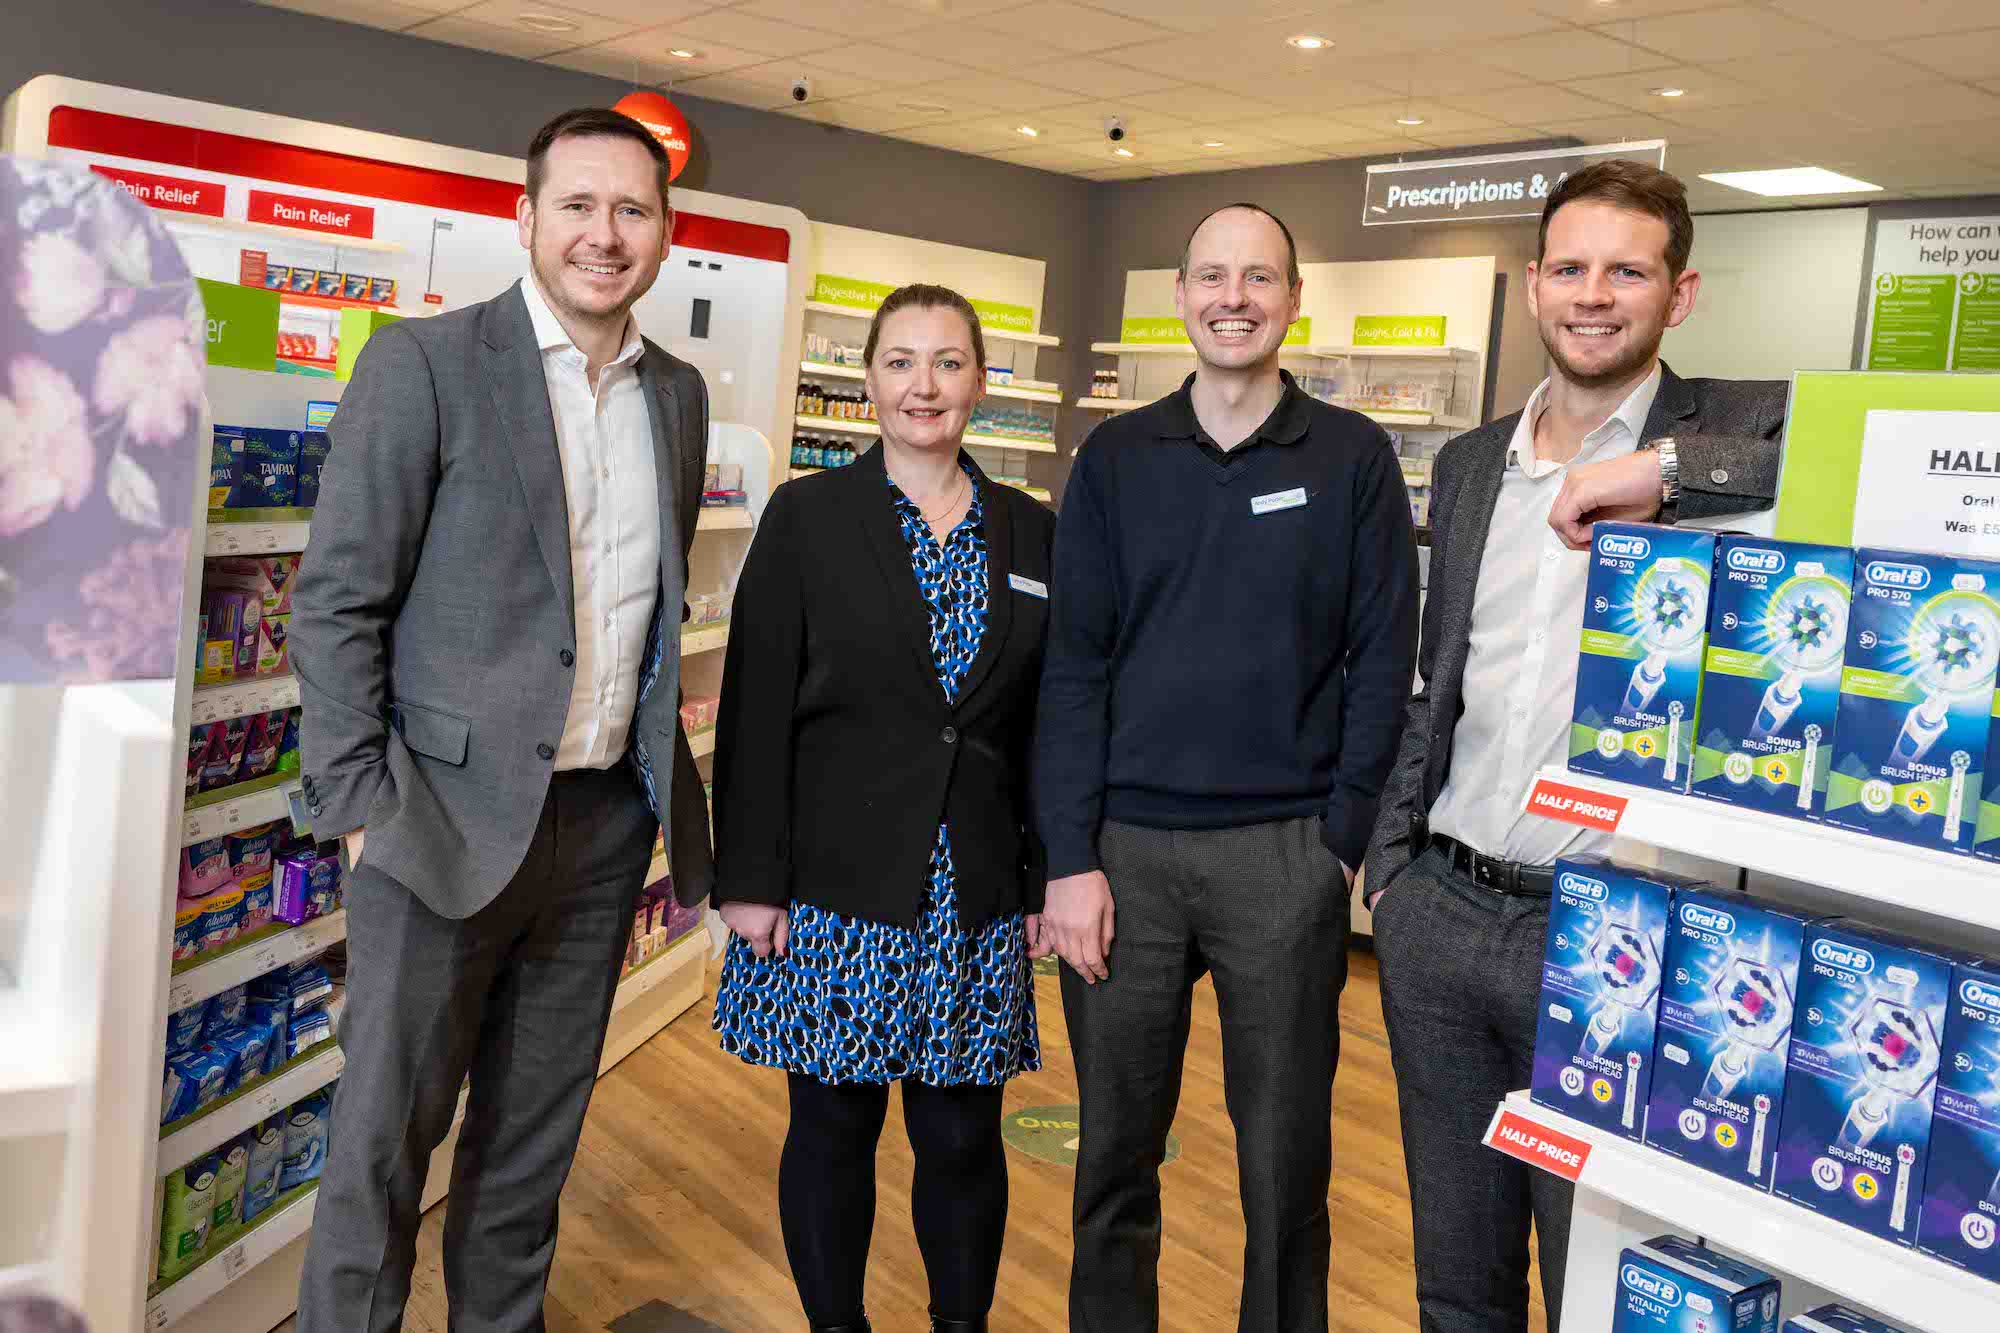 North East pharmacy business expands with support from Bank of Scotland and Aberdein Considine